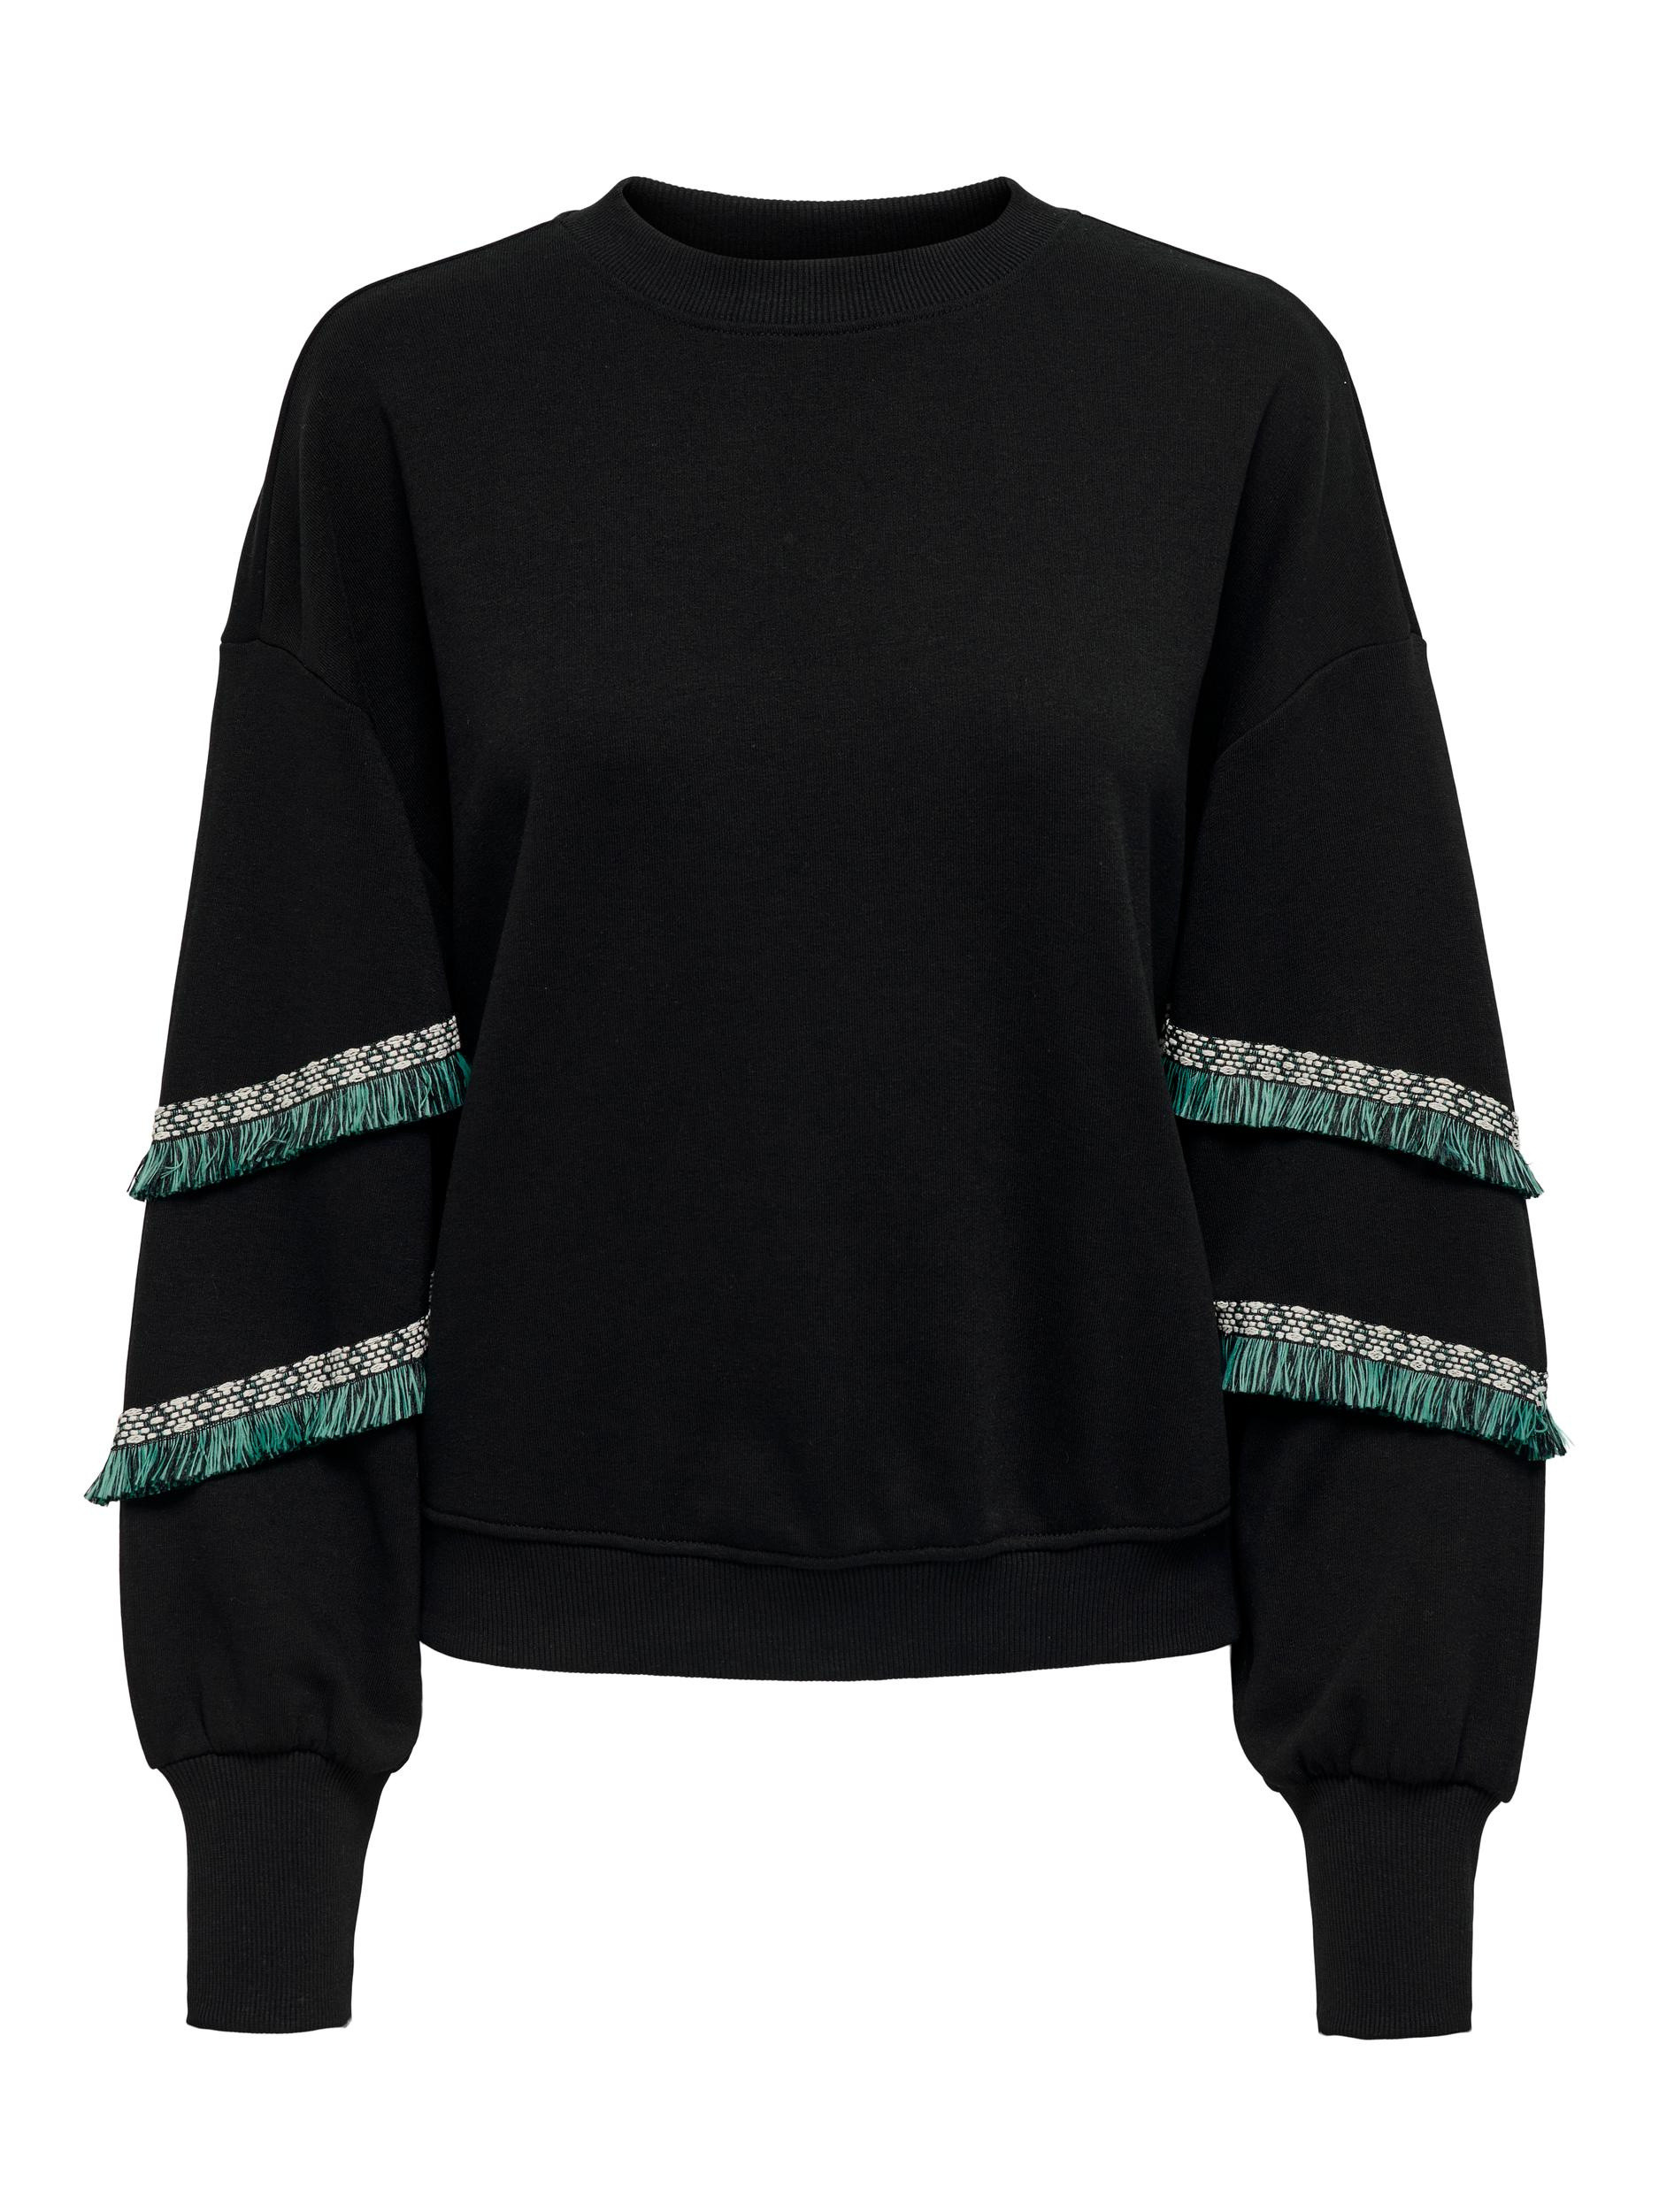 sweater with tassels, Black, large image number 0